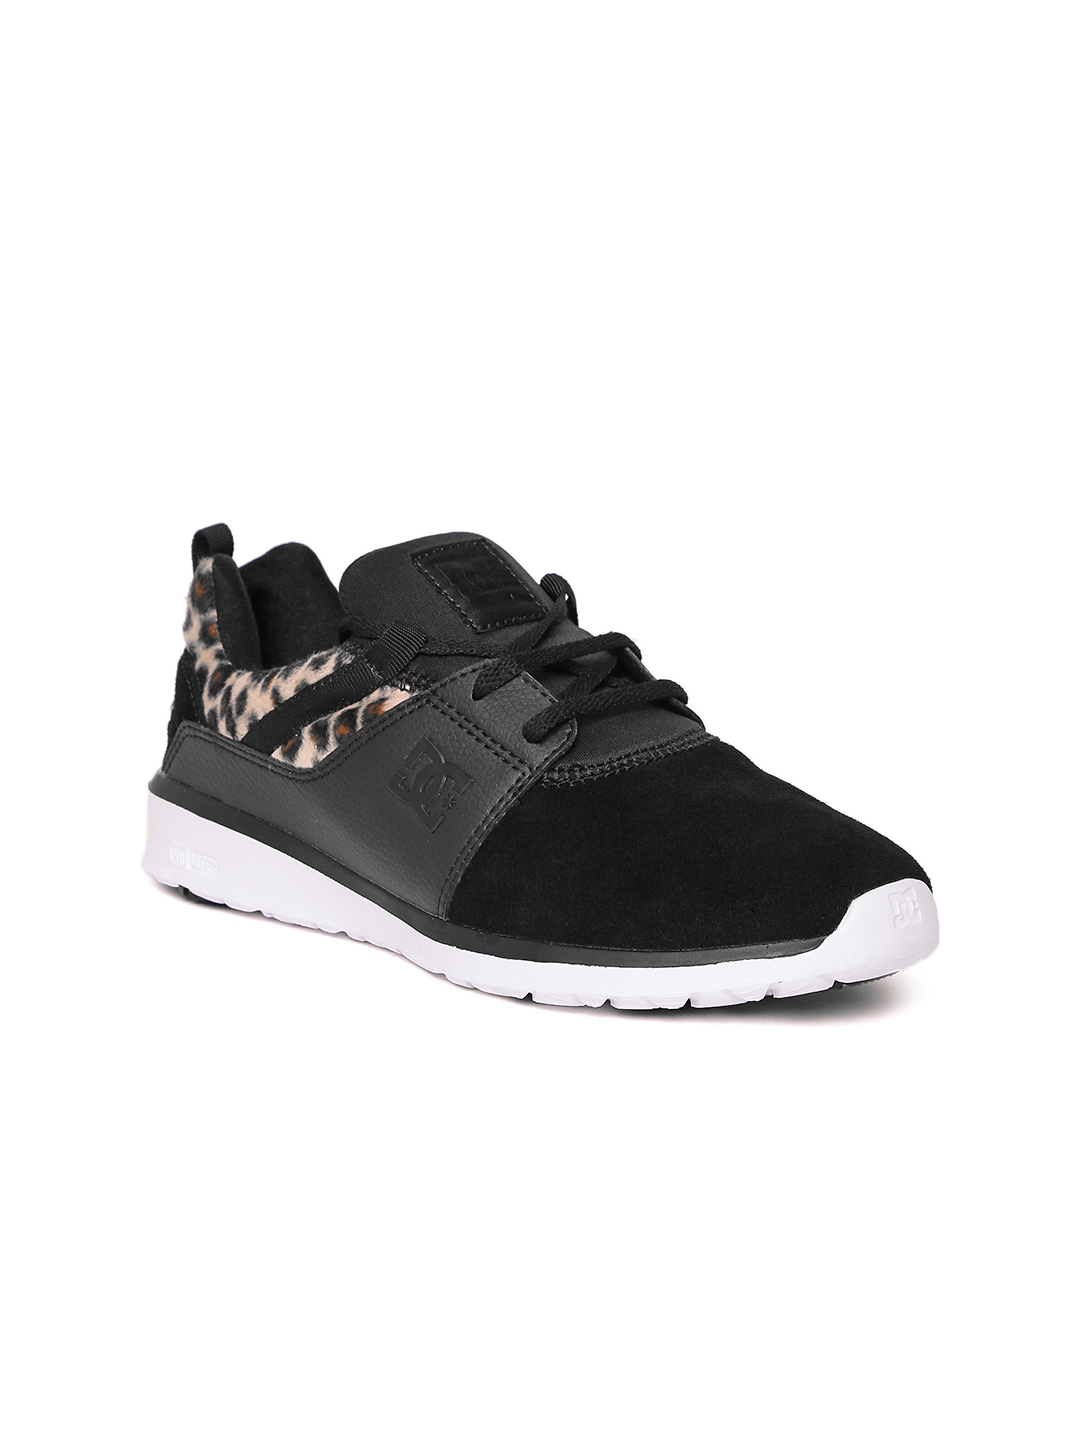 black leather sneakers womens